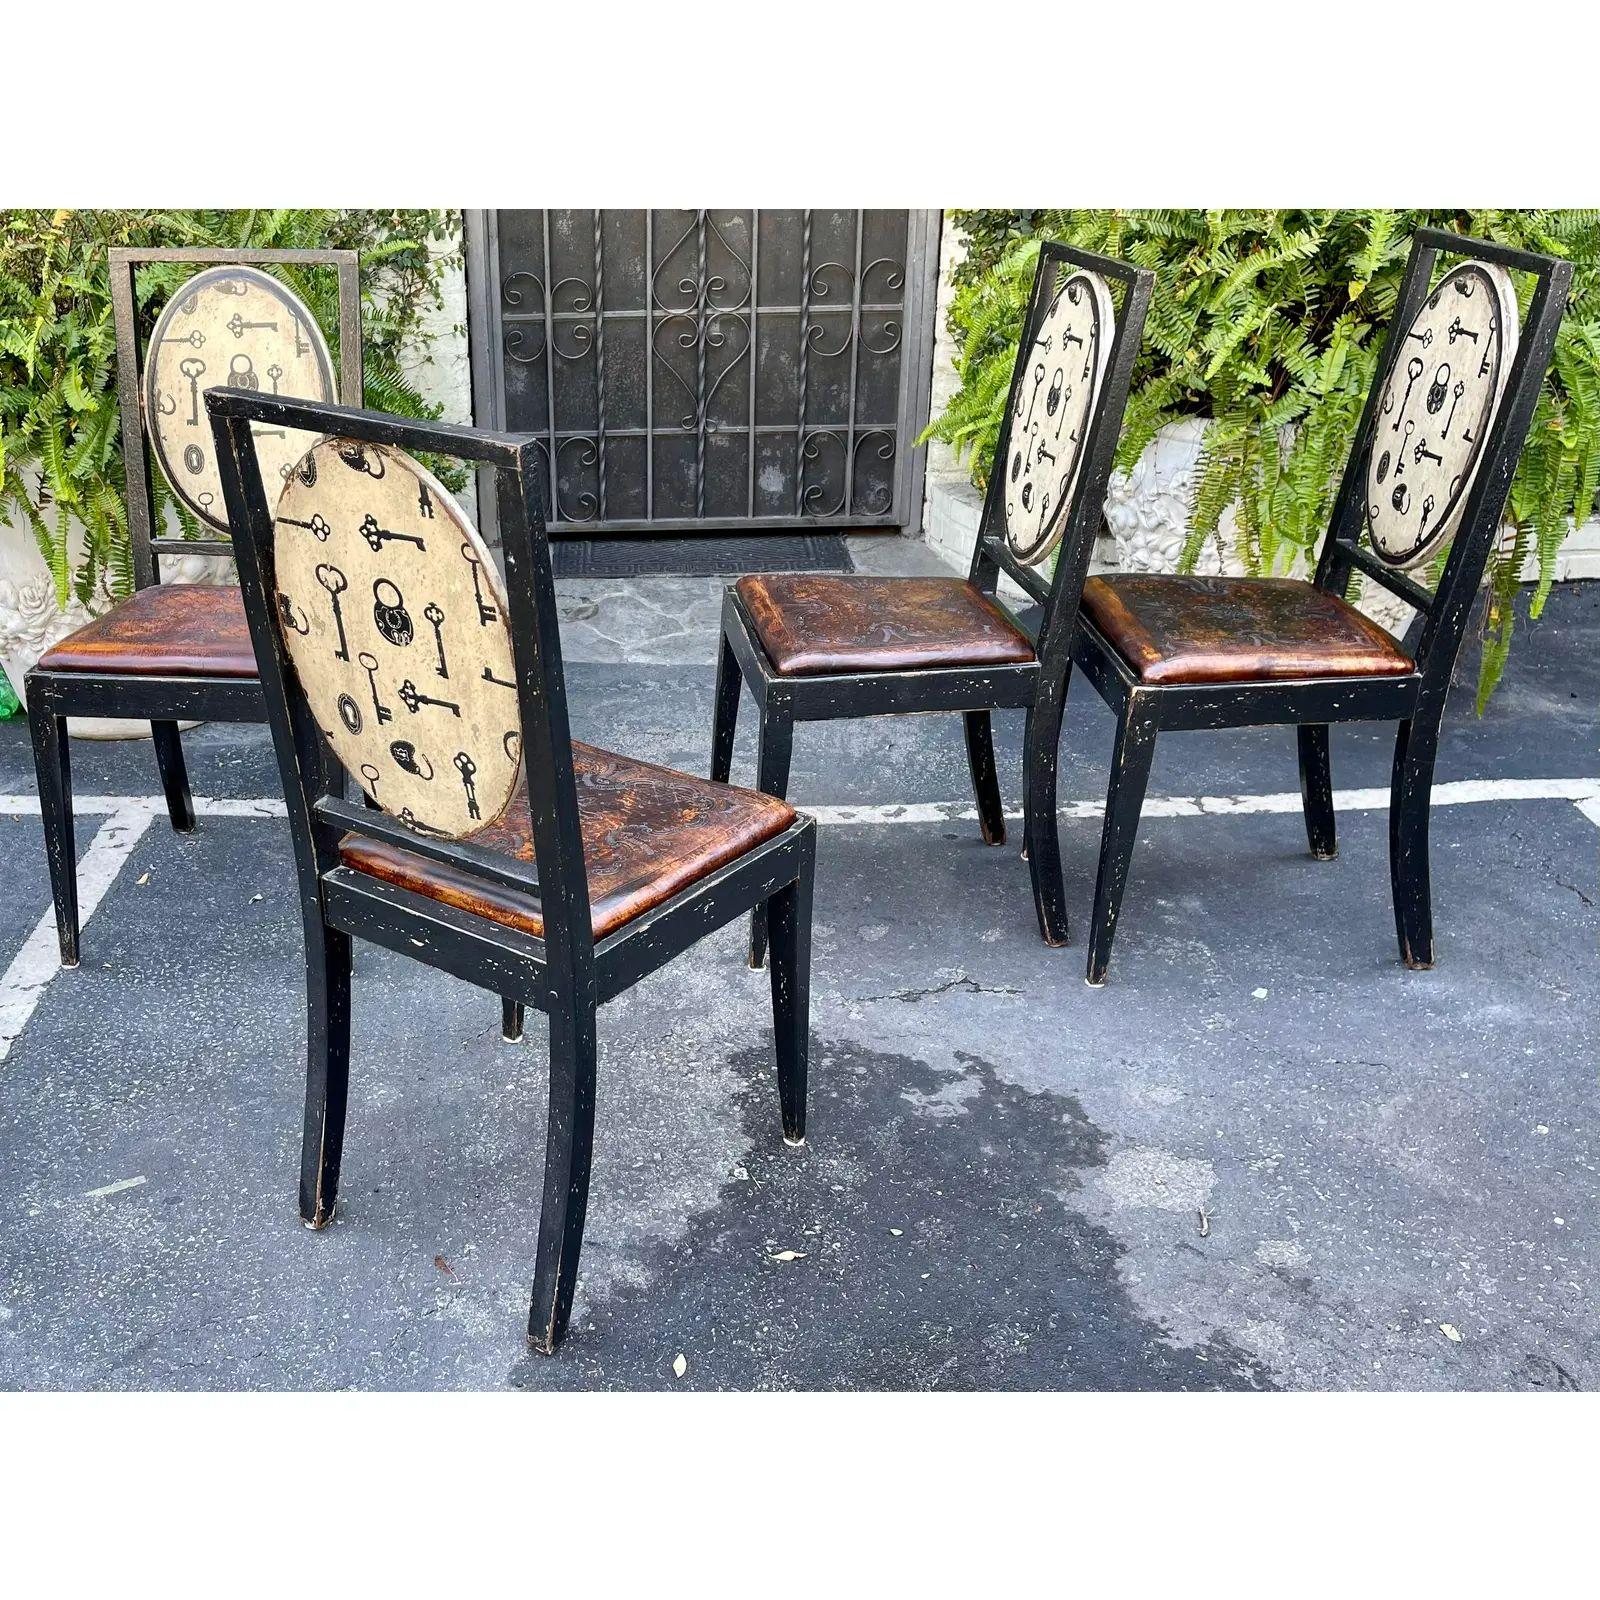 Brazilian Set of 4 Equator Furniture Company Rustic Tooled Leather Painted Chair, 1990s For Sale